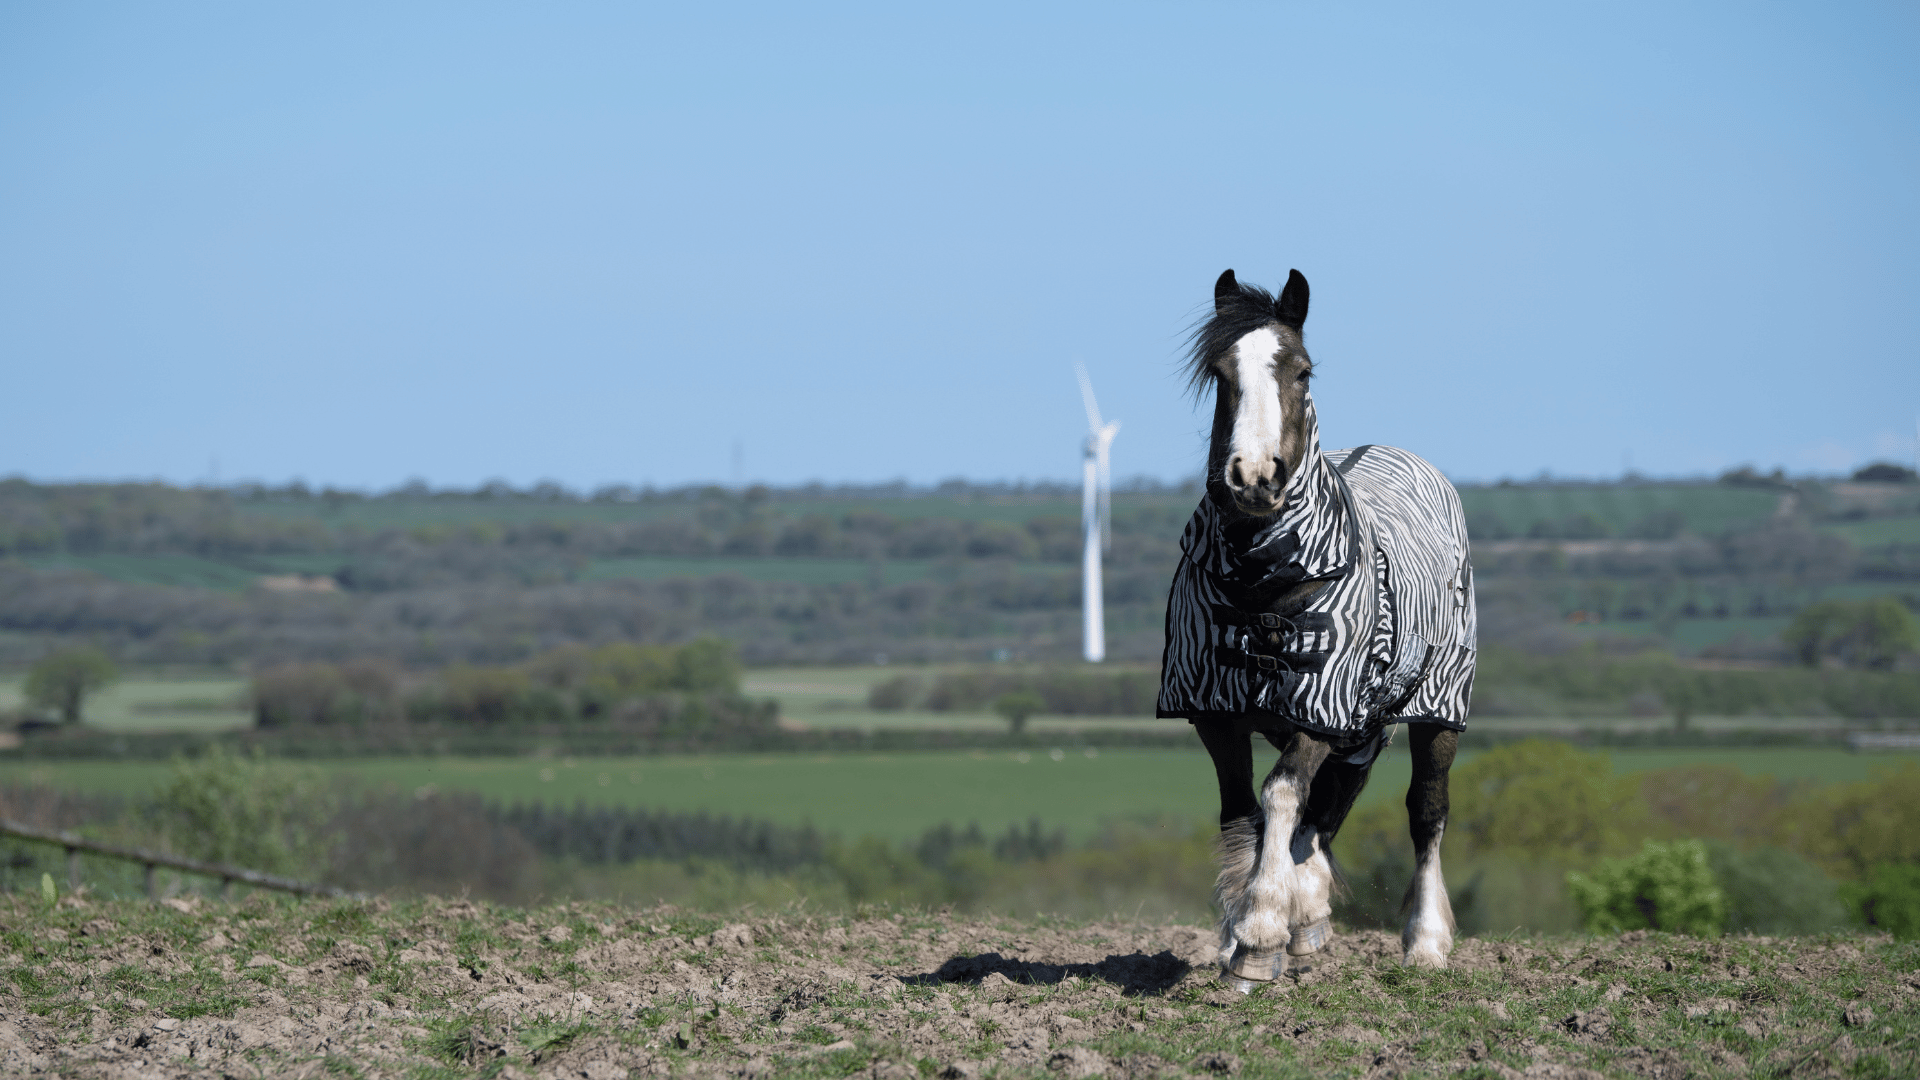 Black and white horse with a zebra print coat on